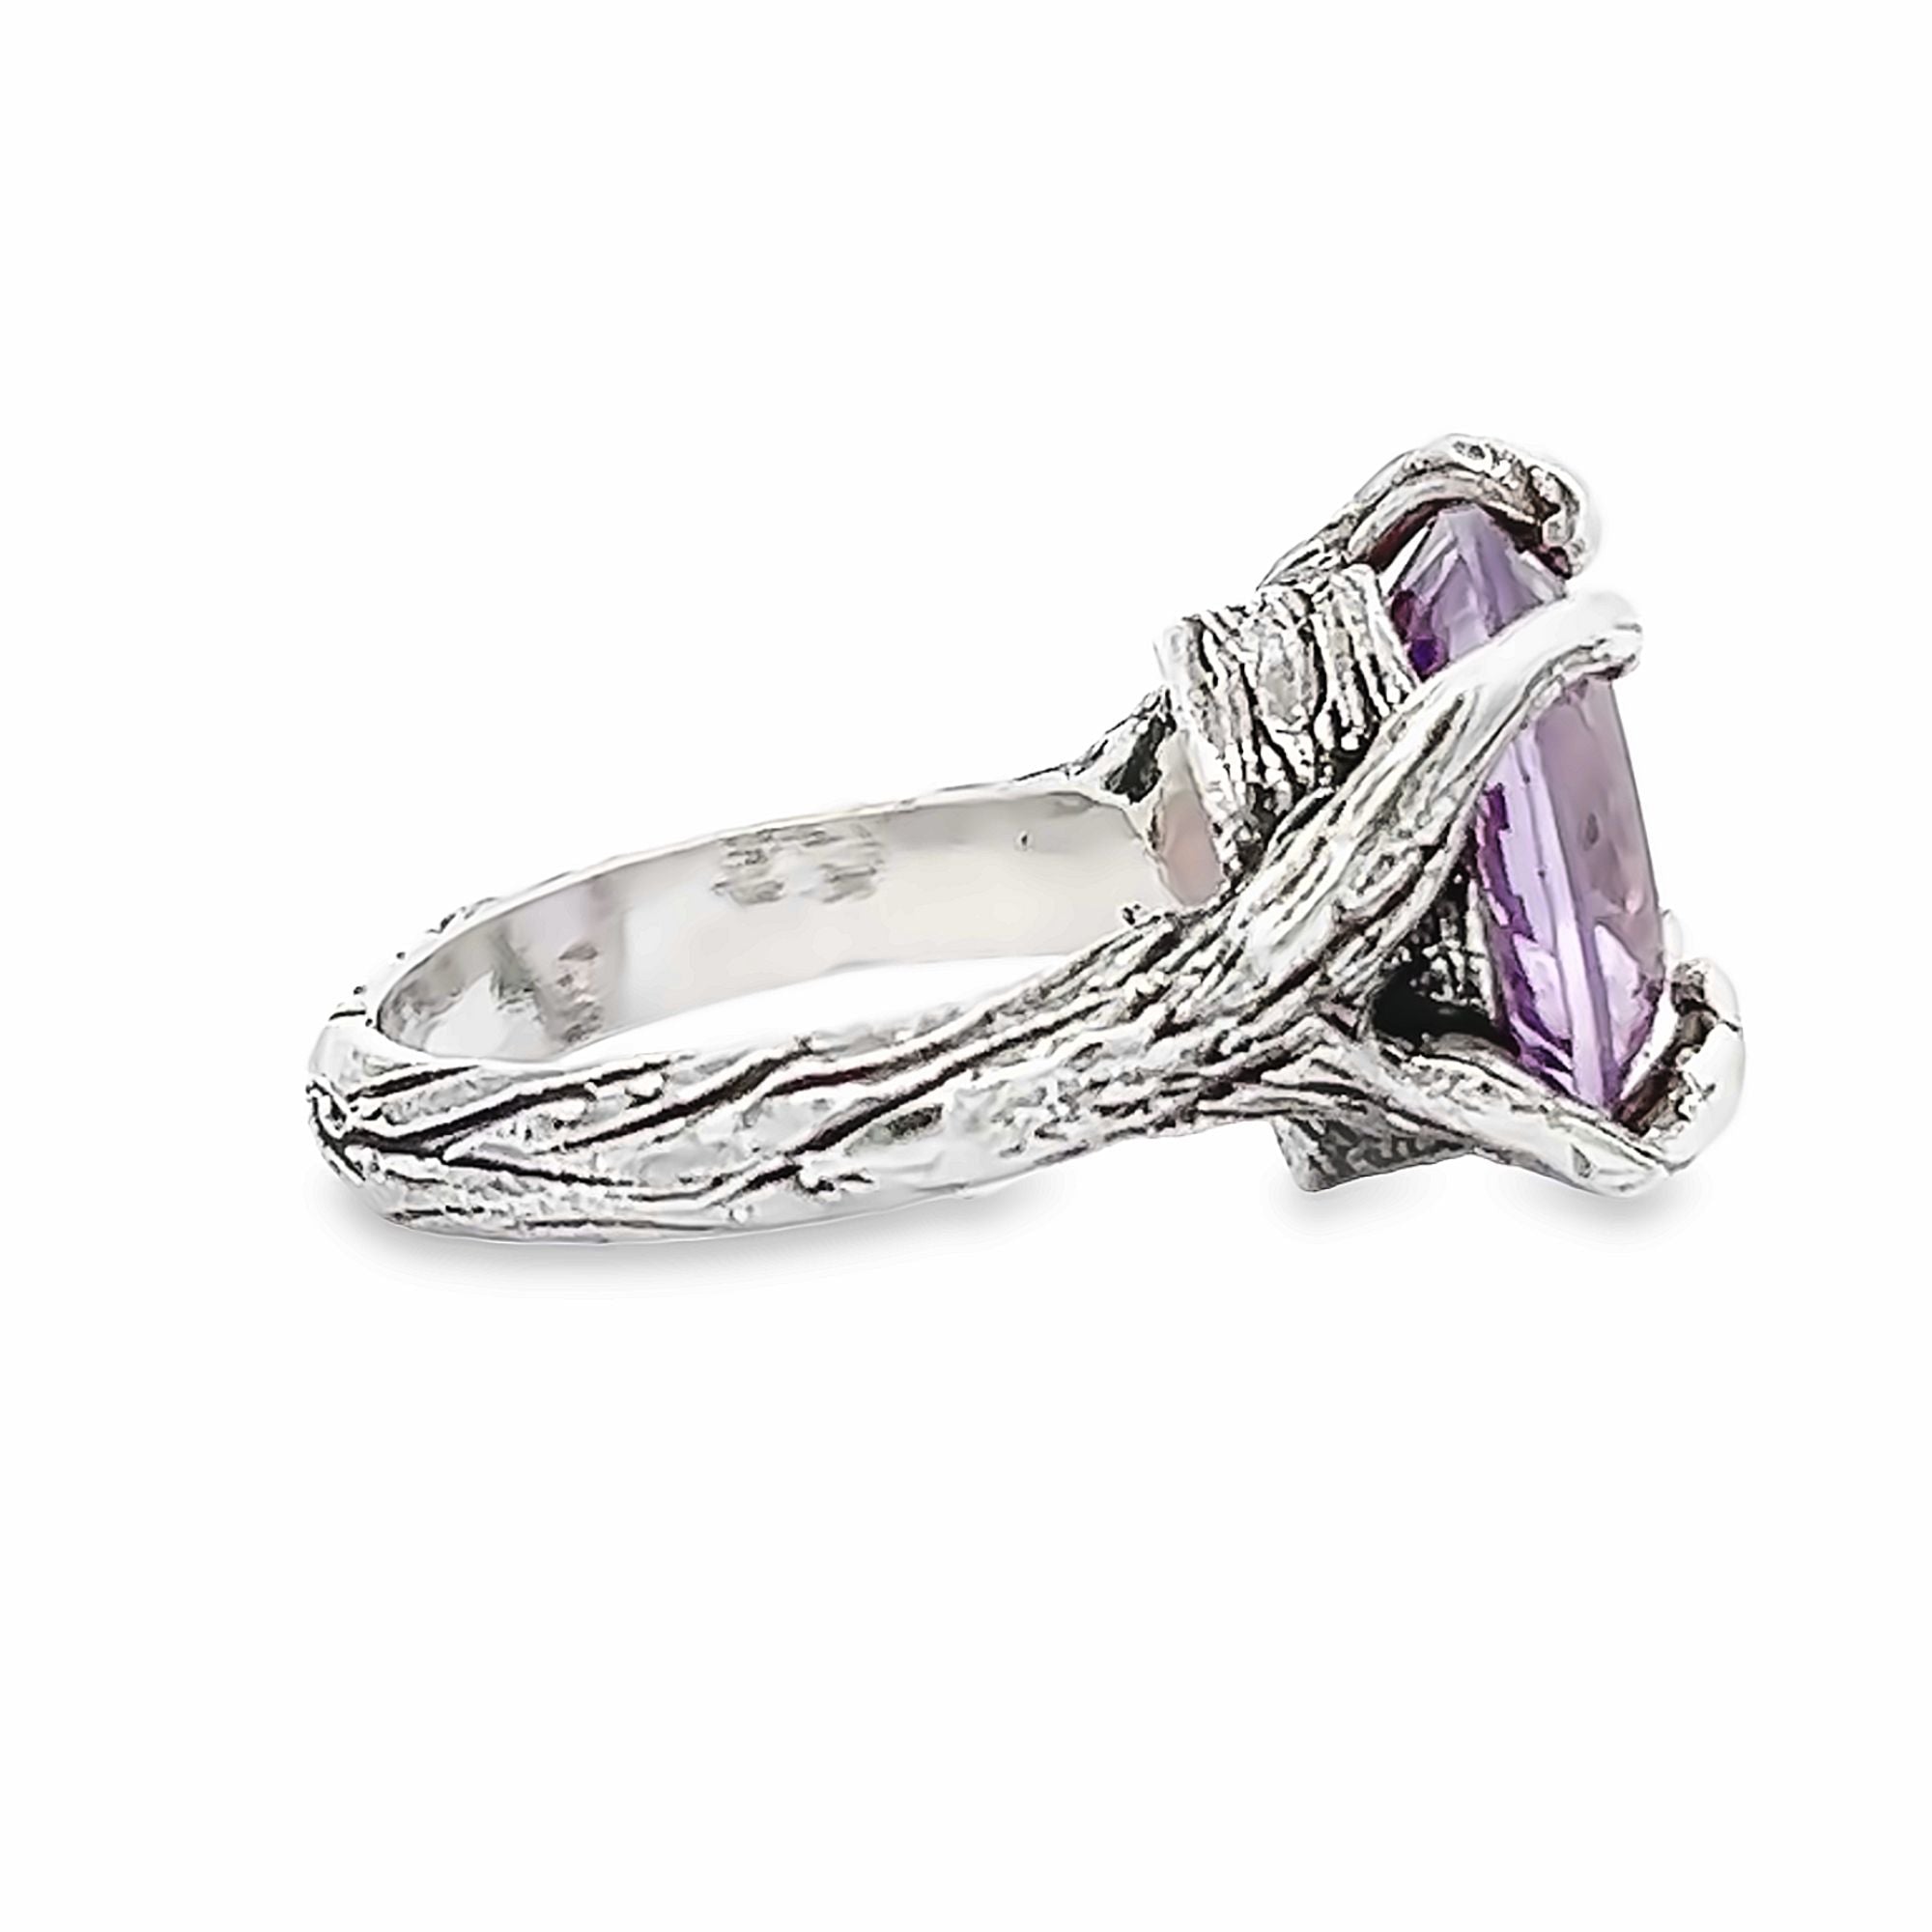 Size View of Amethyst Sterling Silver Cocktail Ring